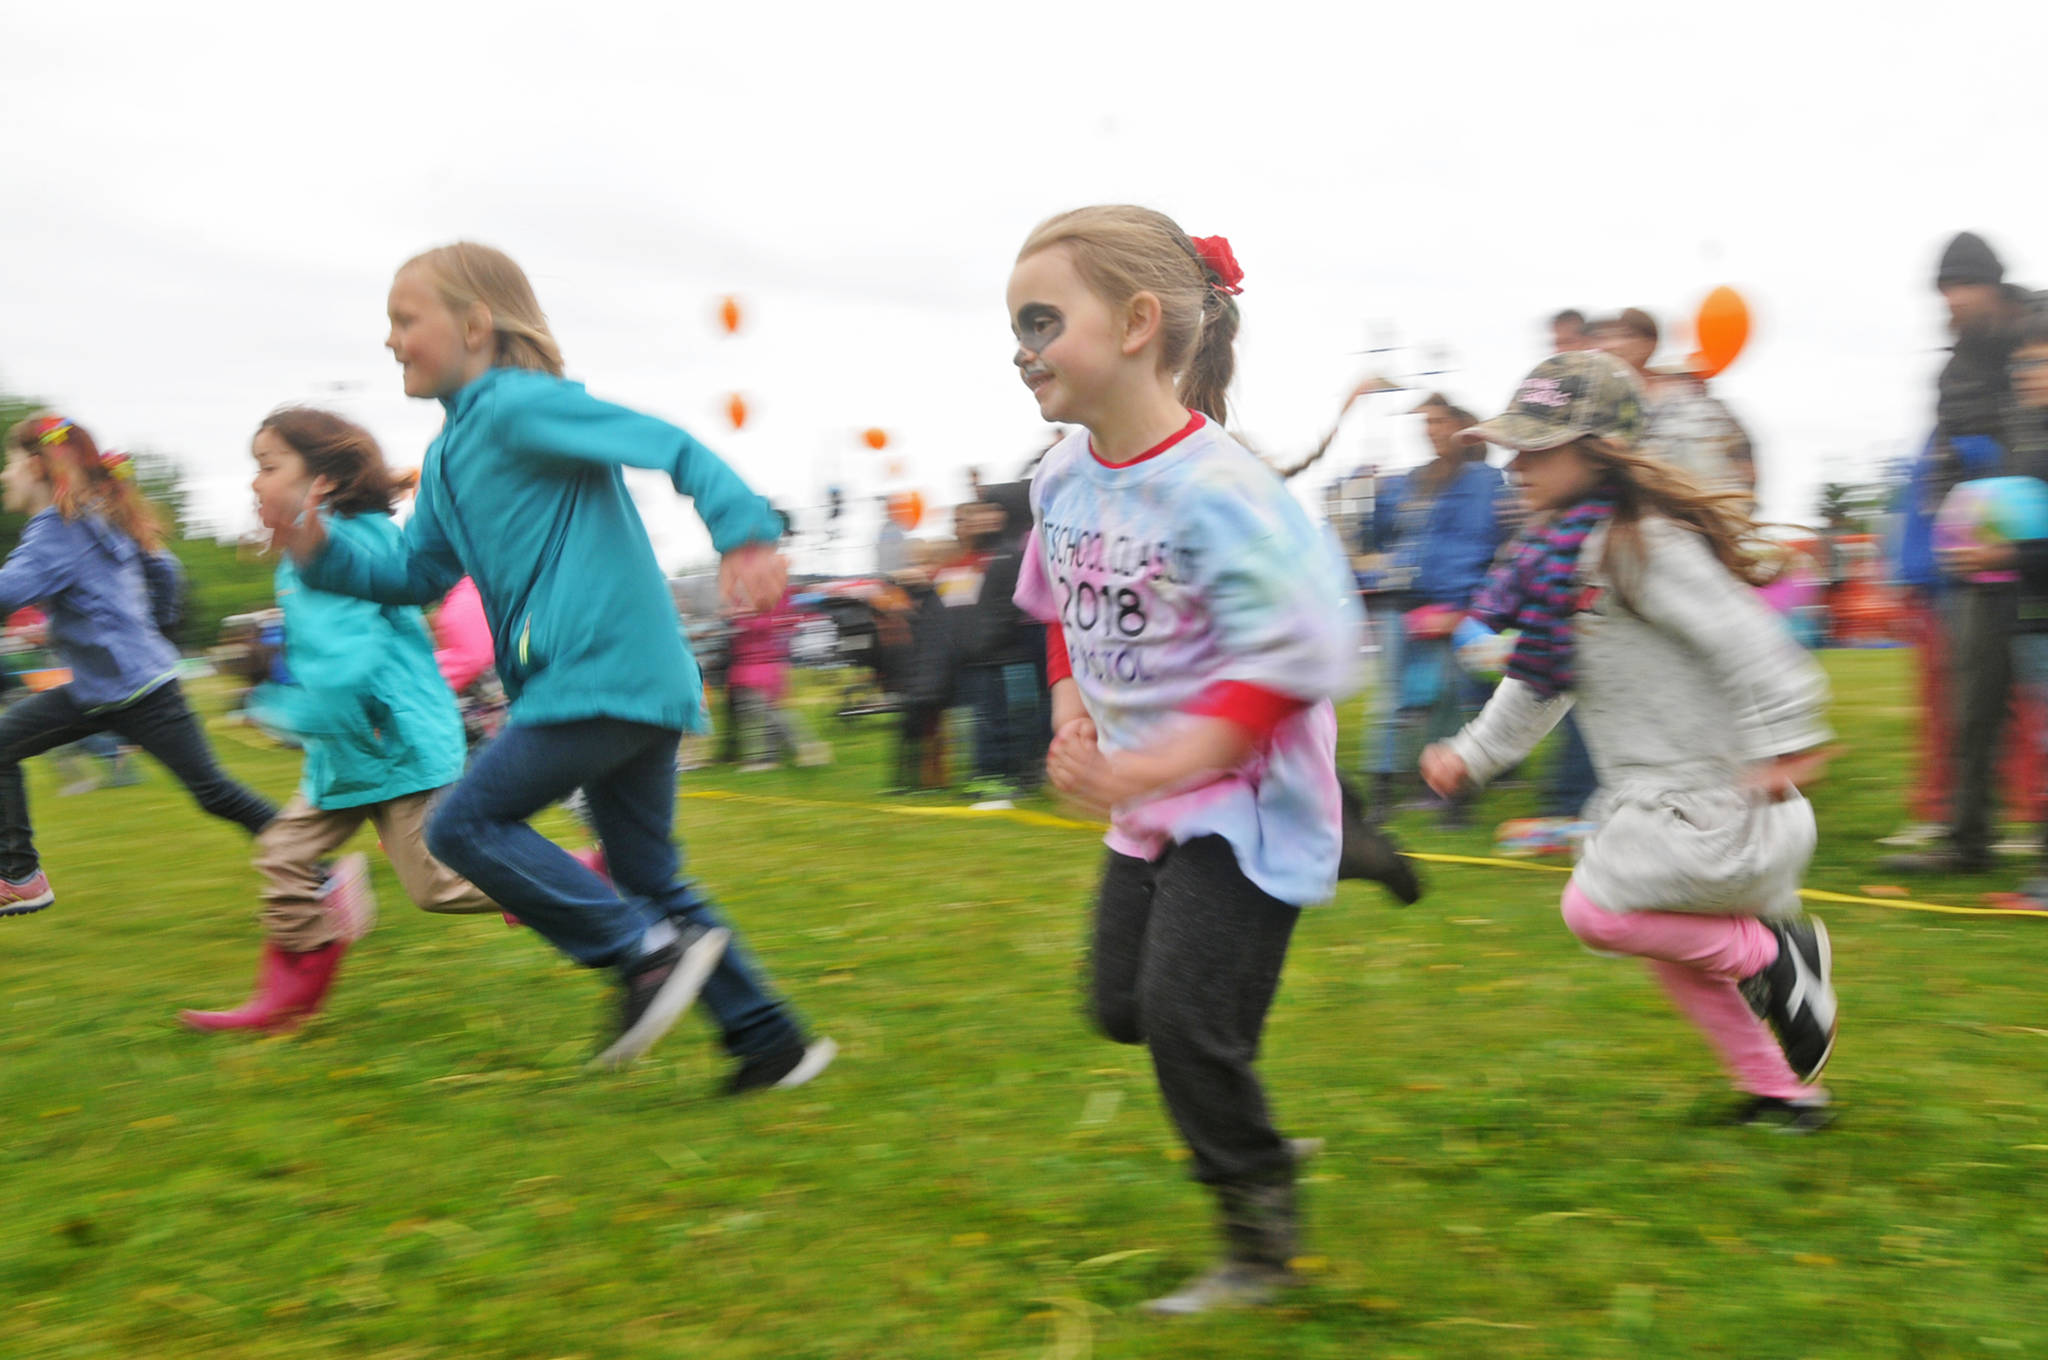 Brystol Flynn, 5, makes a dash for the finish line during a kids’ footrace at the North Peninsula Recreation Service Area’s Family Fun in the Midnight Sun event Saturday, June 16, 2018 in Nikiski, Alaska. The annual event features a variety of booths and activities, including a candy hunt and footraces, martial arts demonstrations, food trucks, raffles and a chance to spray a fire hose courtesy of the Nikiski Fire Department. Though the morning started out chilly and rainy, the rain stopped by early afternoon for awhile. (Photo by Elizabeth Earl/Peninsula Clarion)